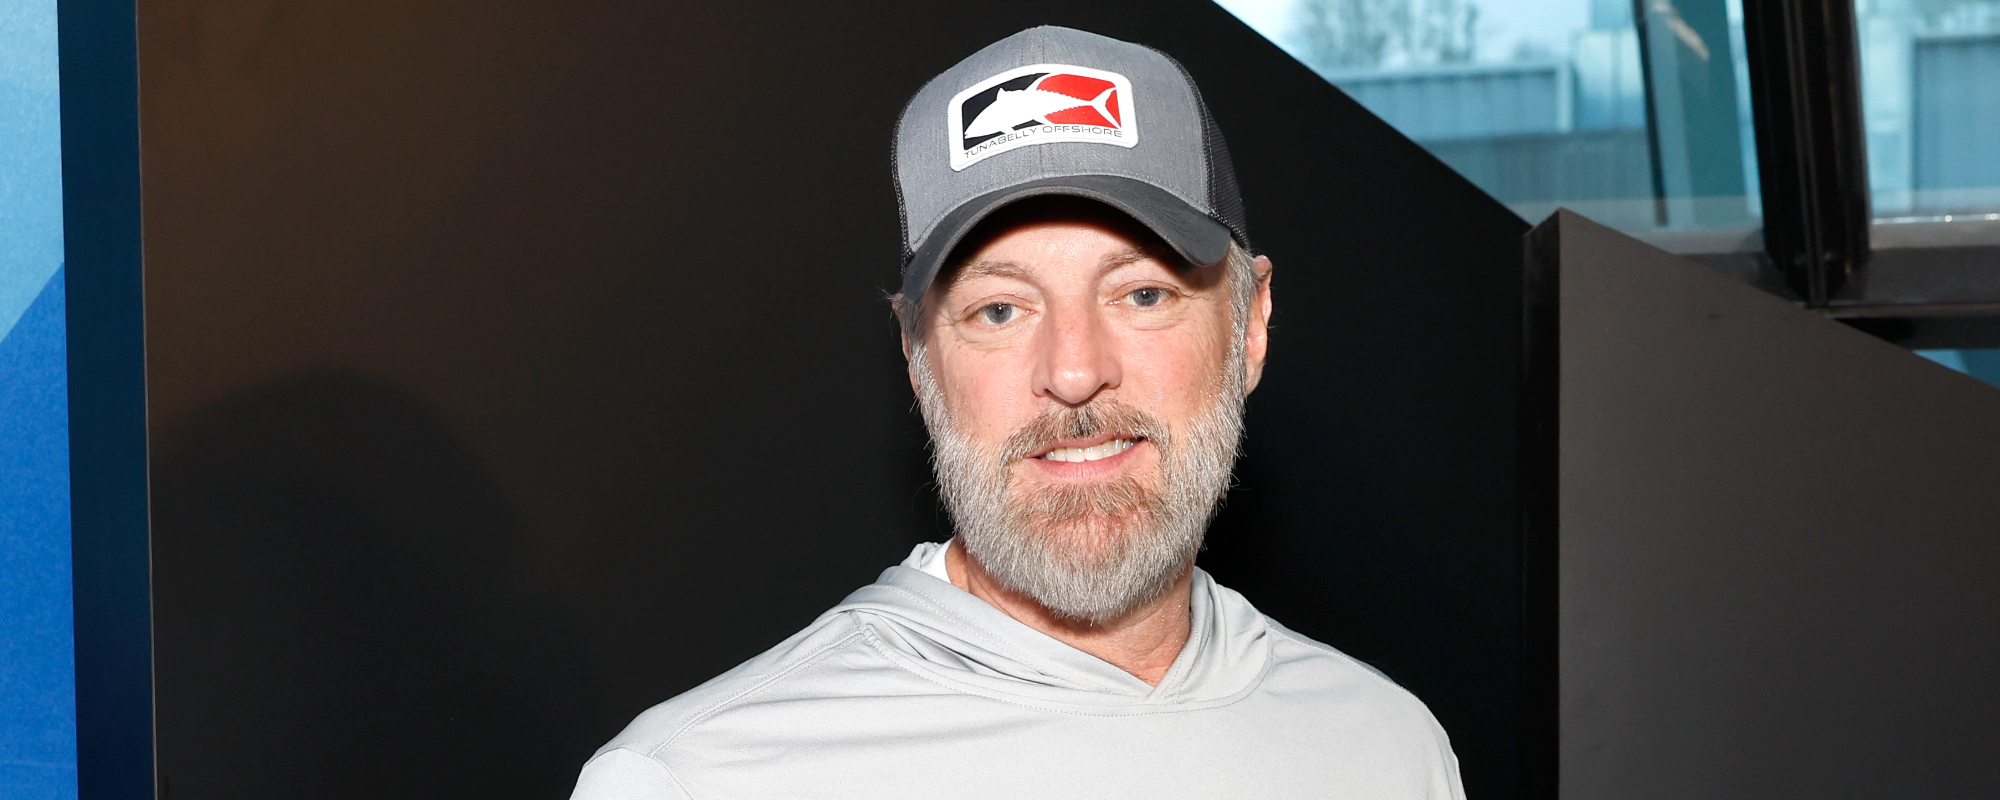 Darryl Worley Shares Tragic Image of His Barn up in Flames: “I Don’t Think I Will Get This Sight Out of My Mind”